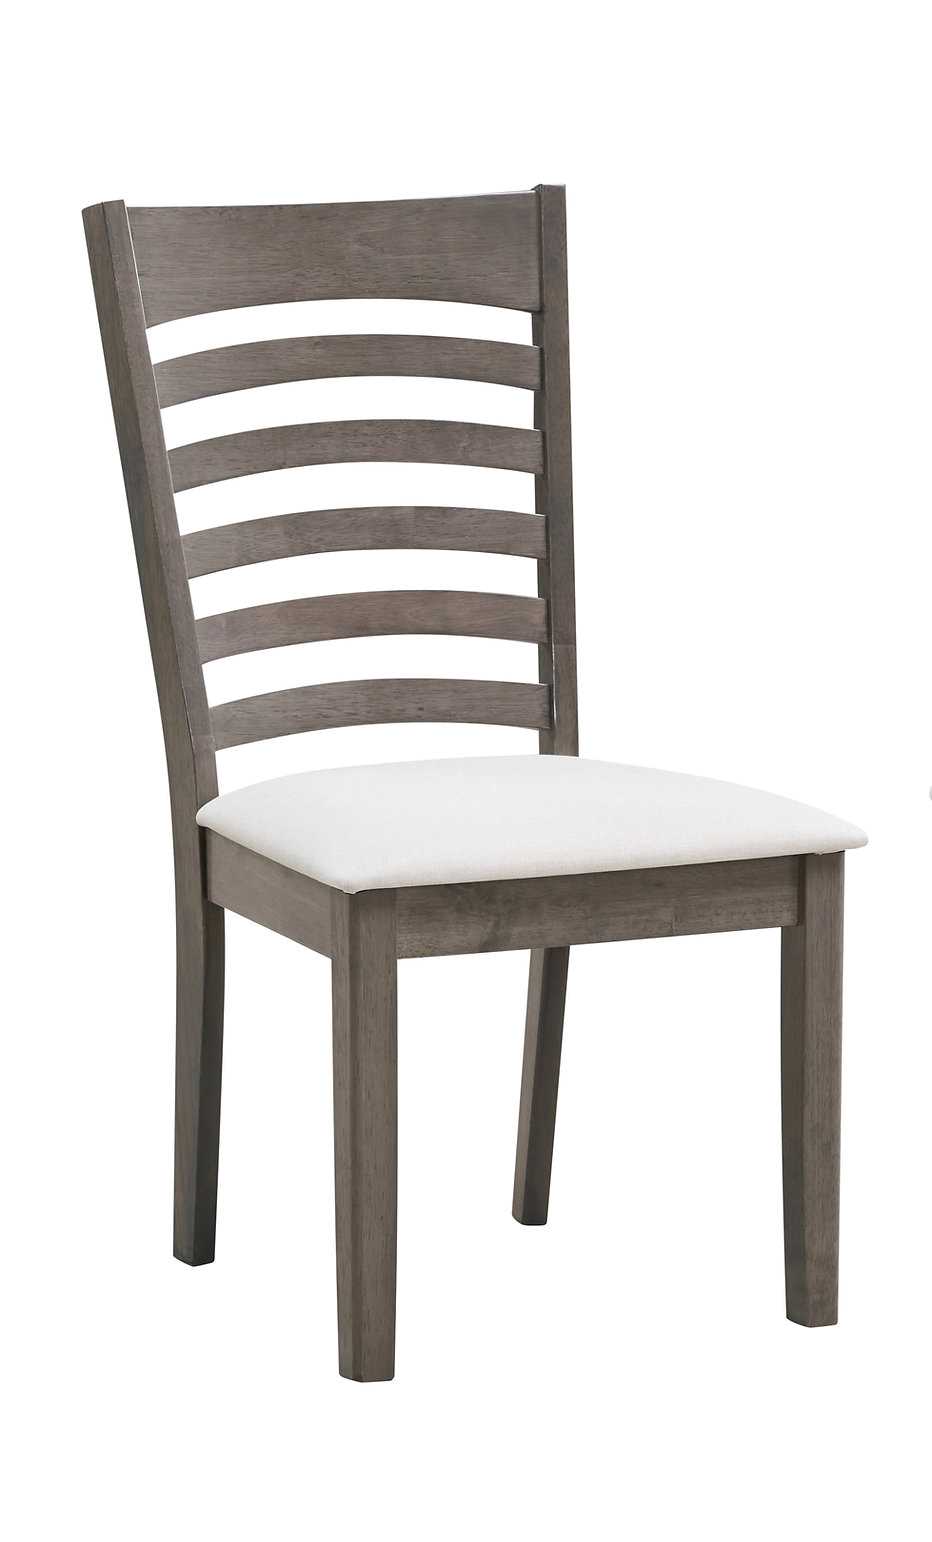 2 Piece Antique Grey Dining Chair in Cream Fabric Seats 1082